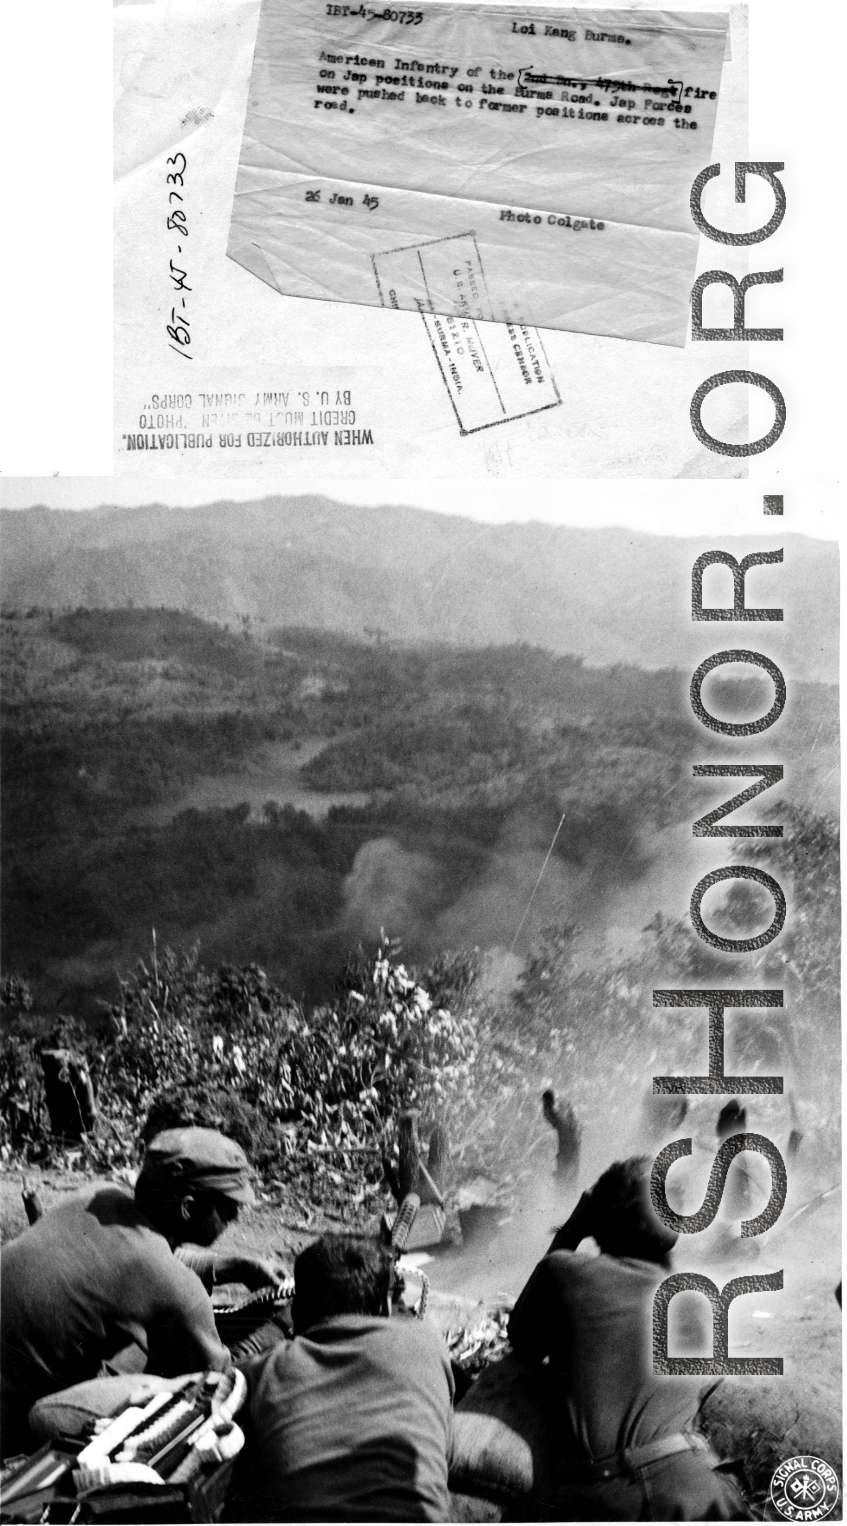 American troops of the 2nd Battalion, 279th Regiment, use a machine gun to fire upon Japanese positions on the Burma Road, at Loi Kang Burma. January 26, 1945.   Photo by Colgate.